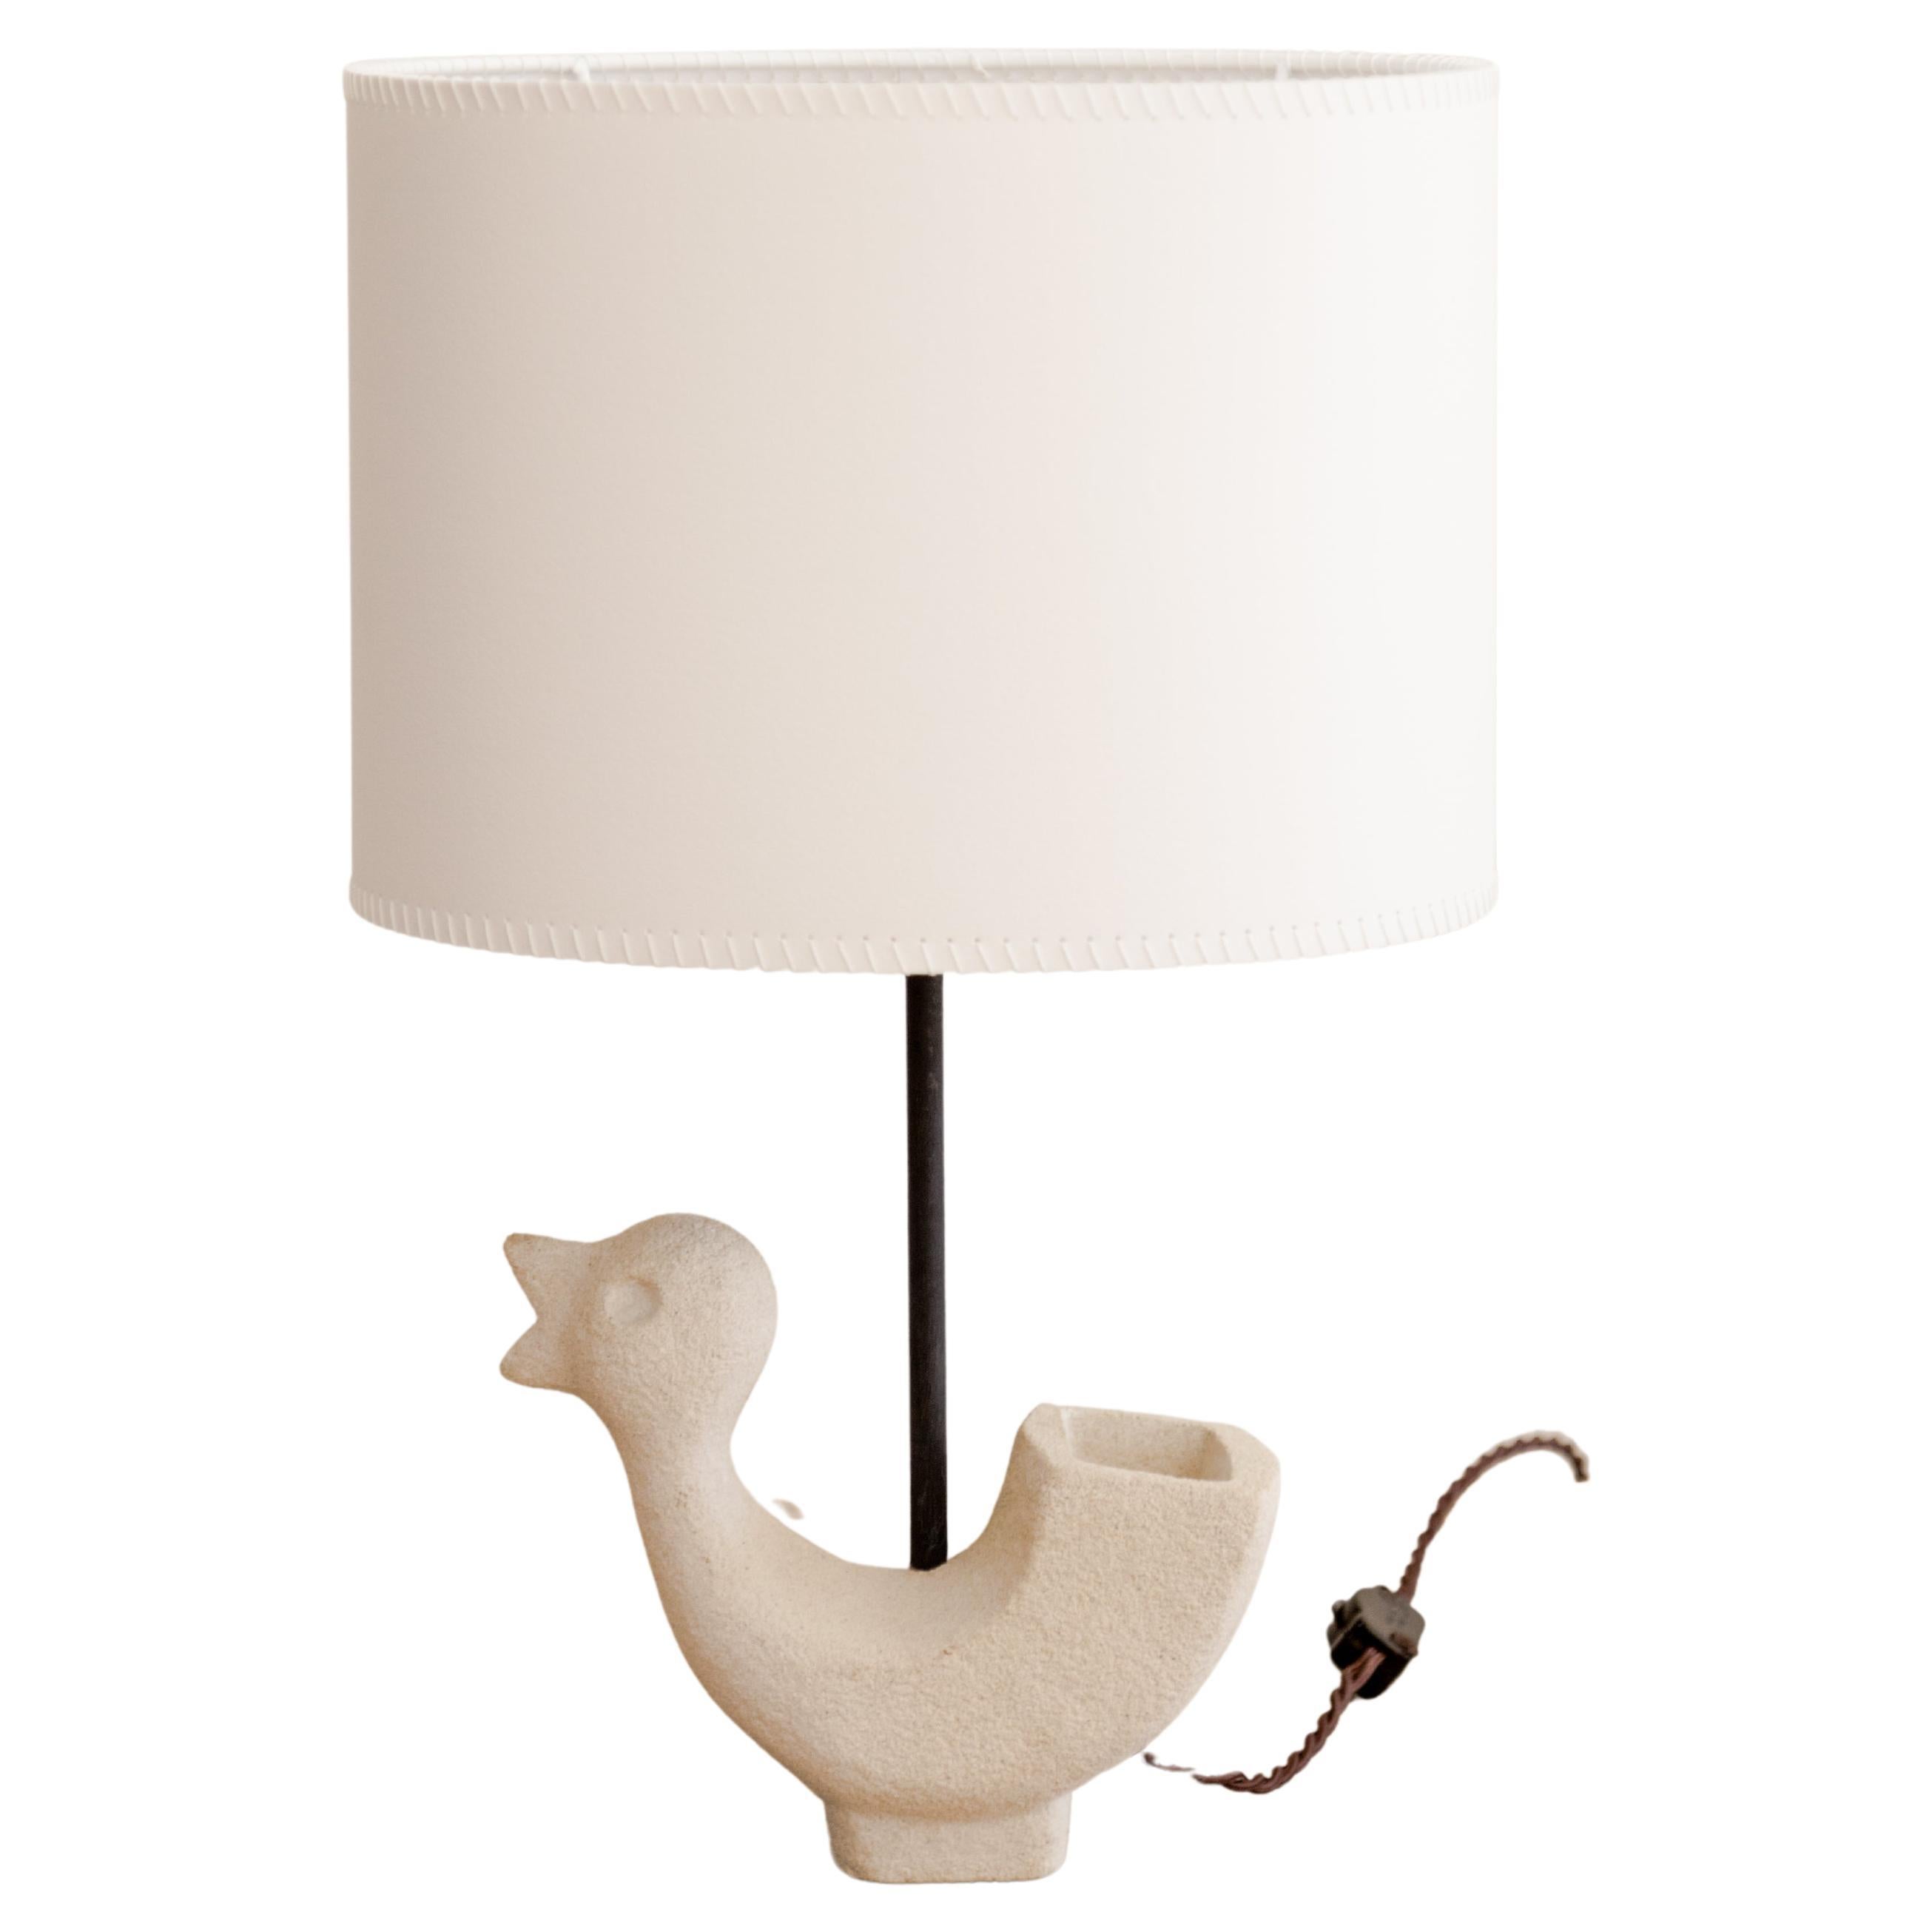 Whimsical Cast Stone Bird Chick Table Lamp For Sale